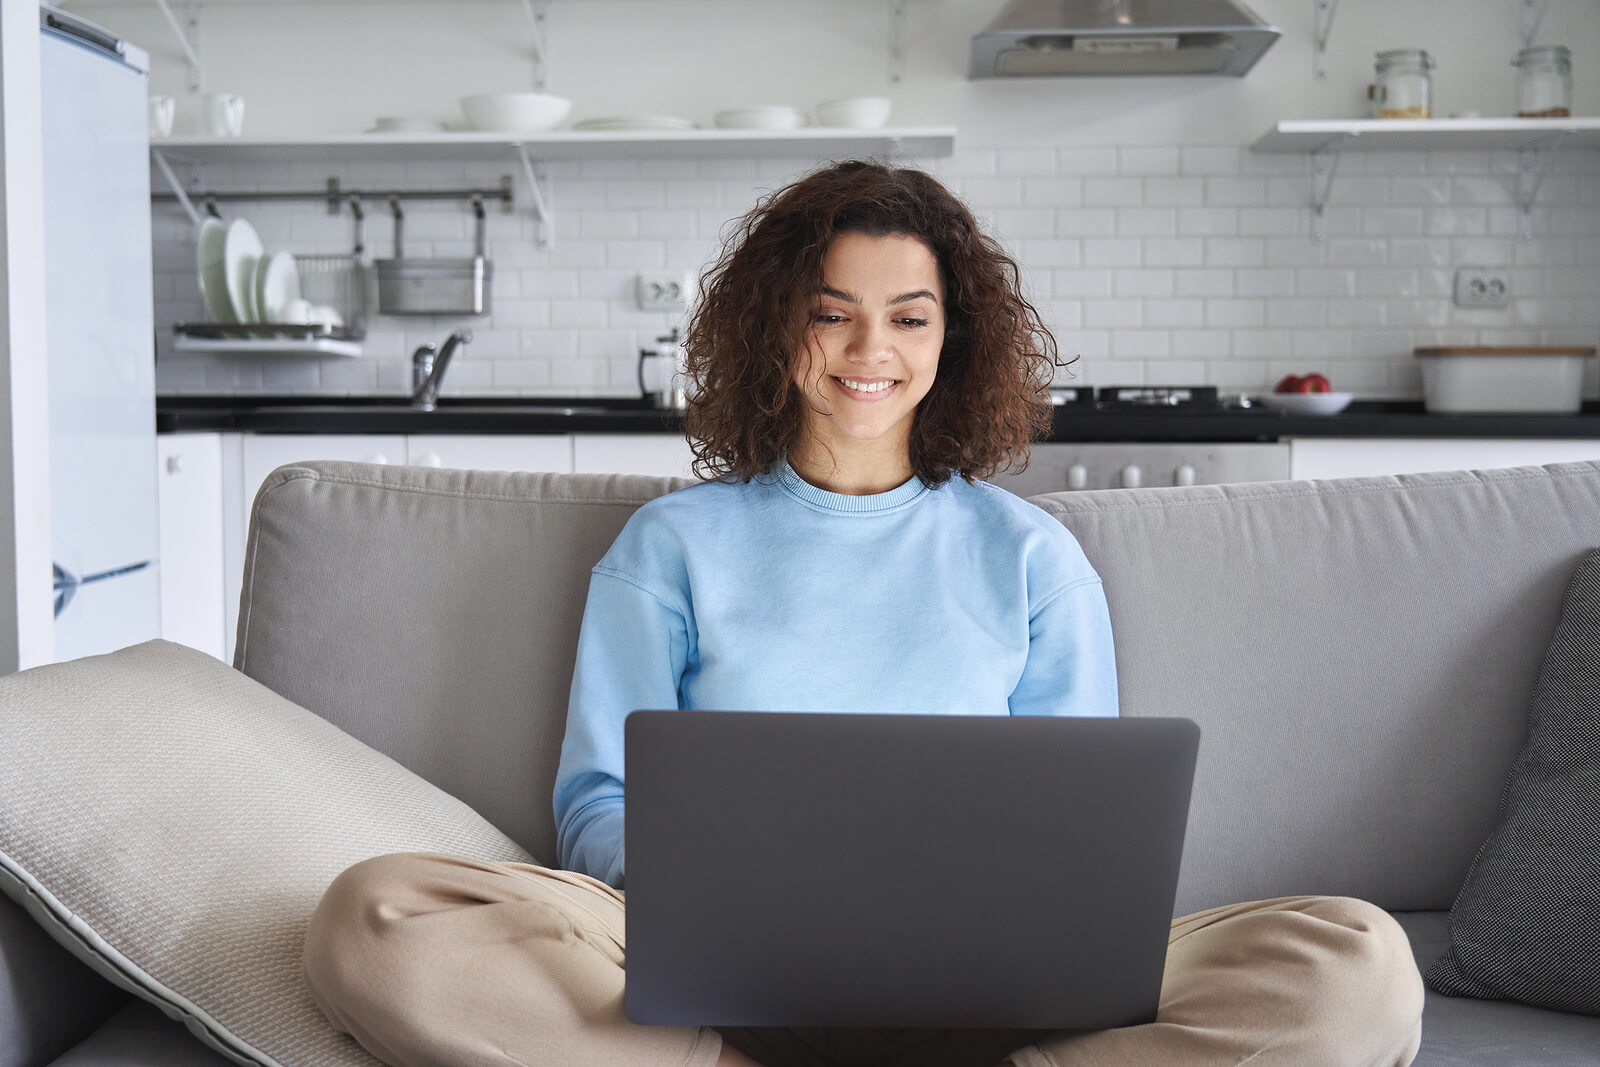 A woman sits on a couch while typing on a laptop and smiling. Looking to begin anxiety treatment in Evanston, IL? Speak with our anxiety therapist to begin working through your social anxiety. 